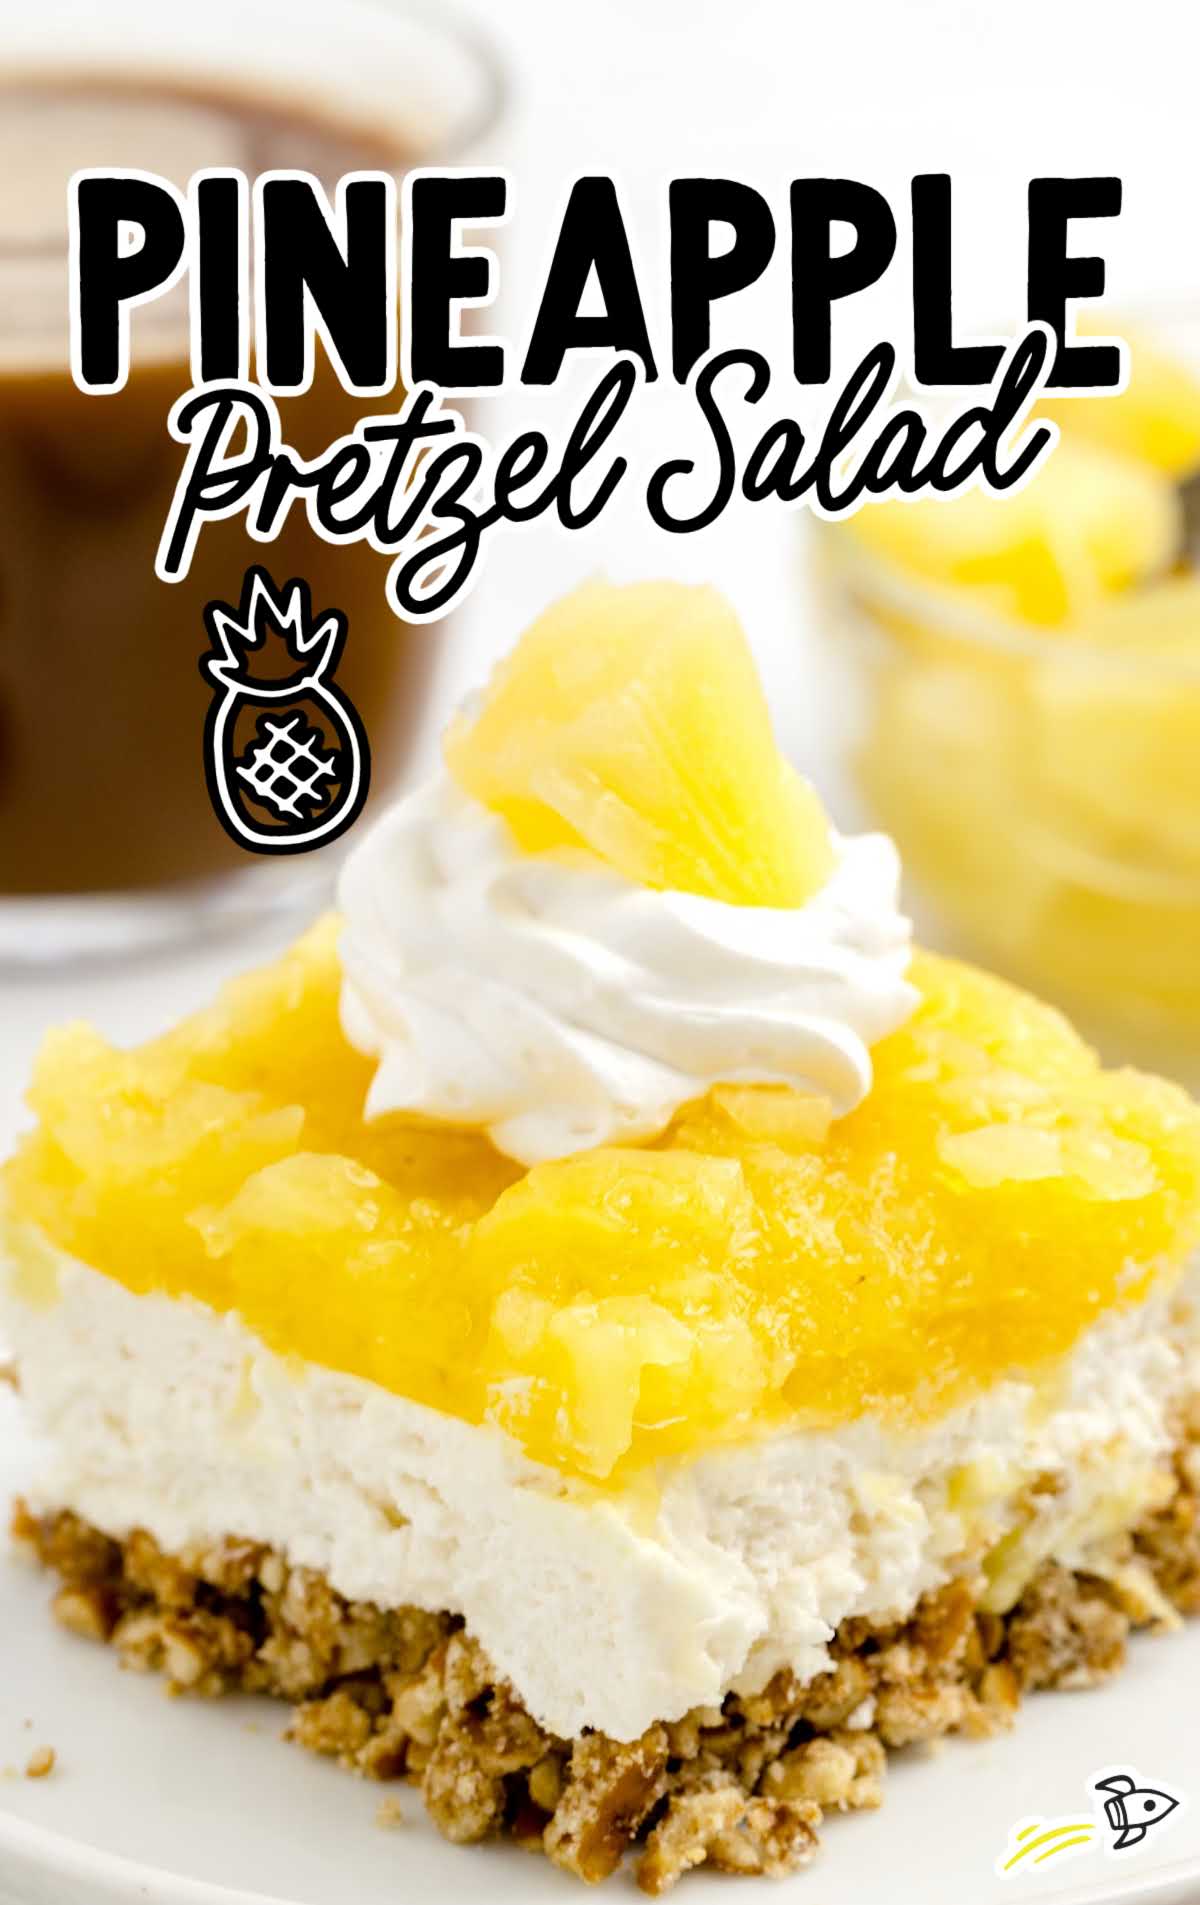 a close up shot of a slice of Pineapple Pretzel Salad on a plate